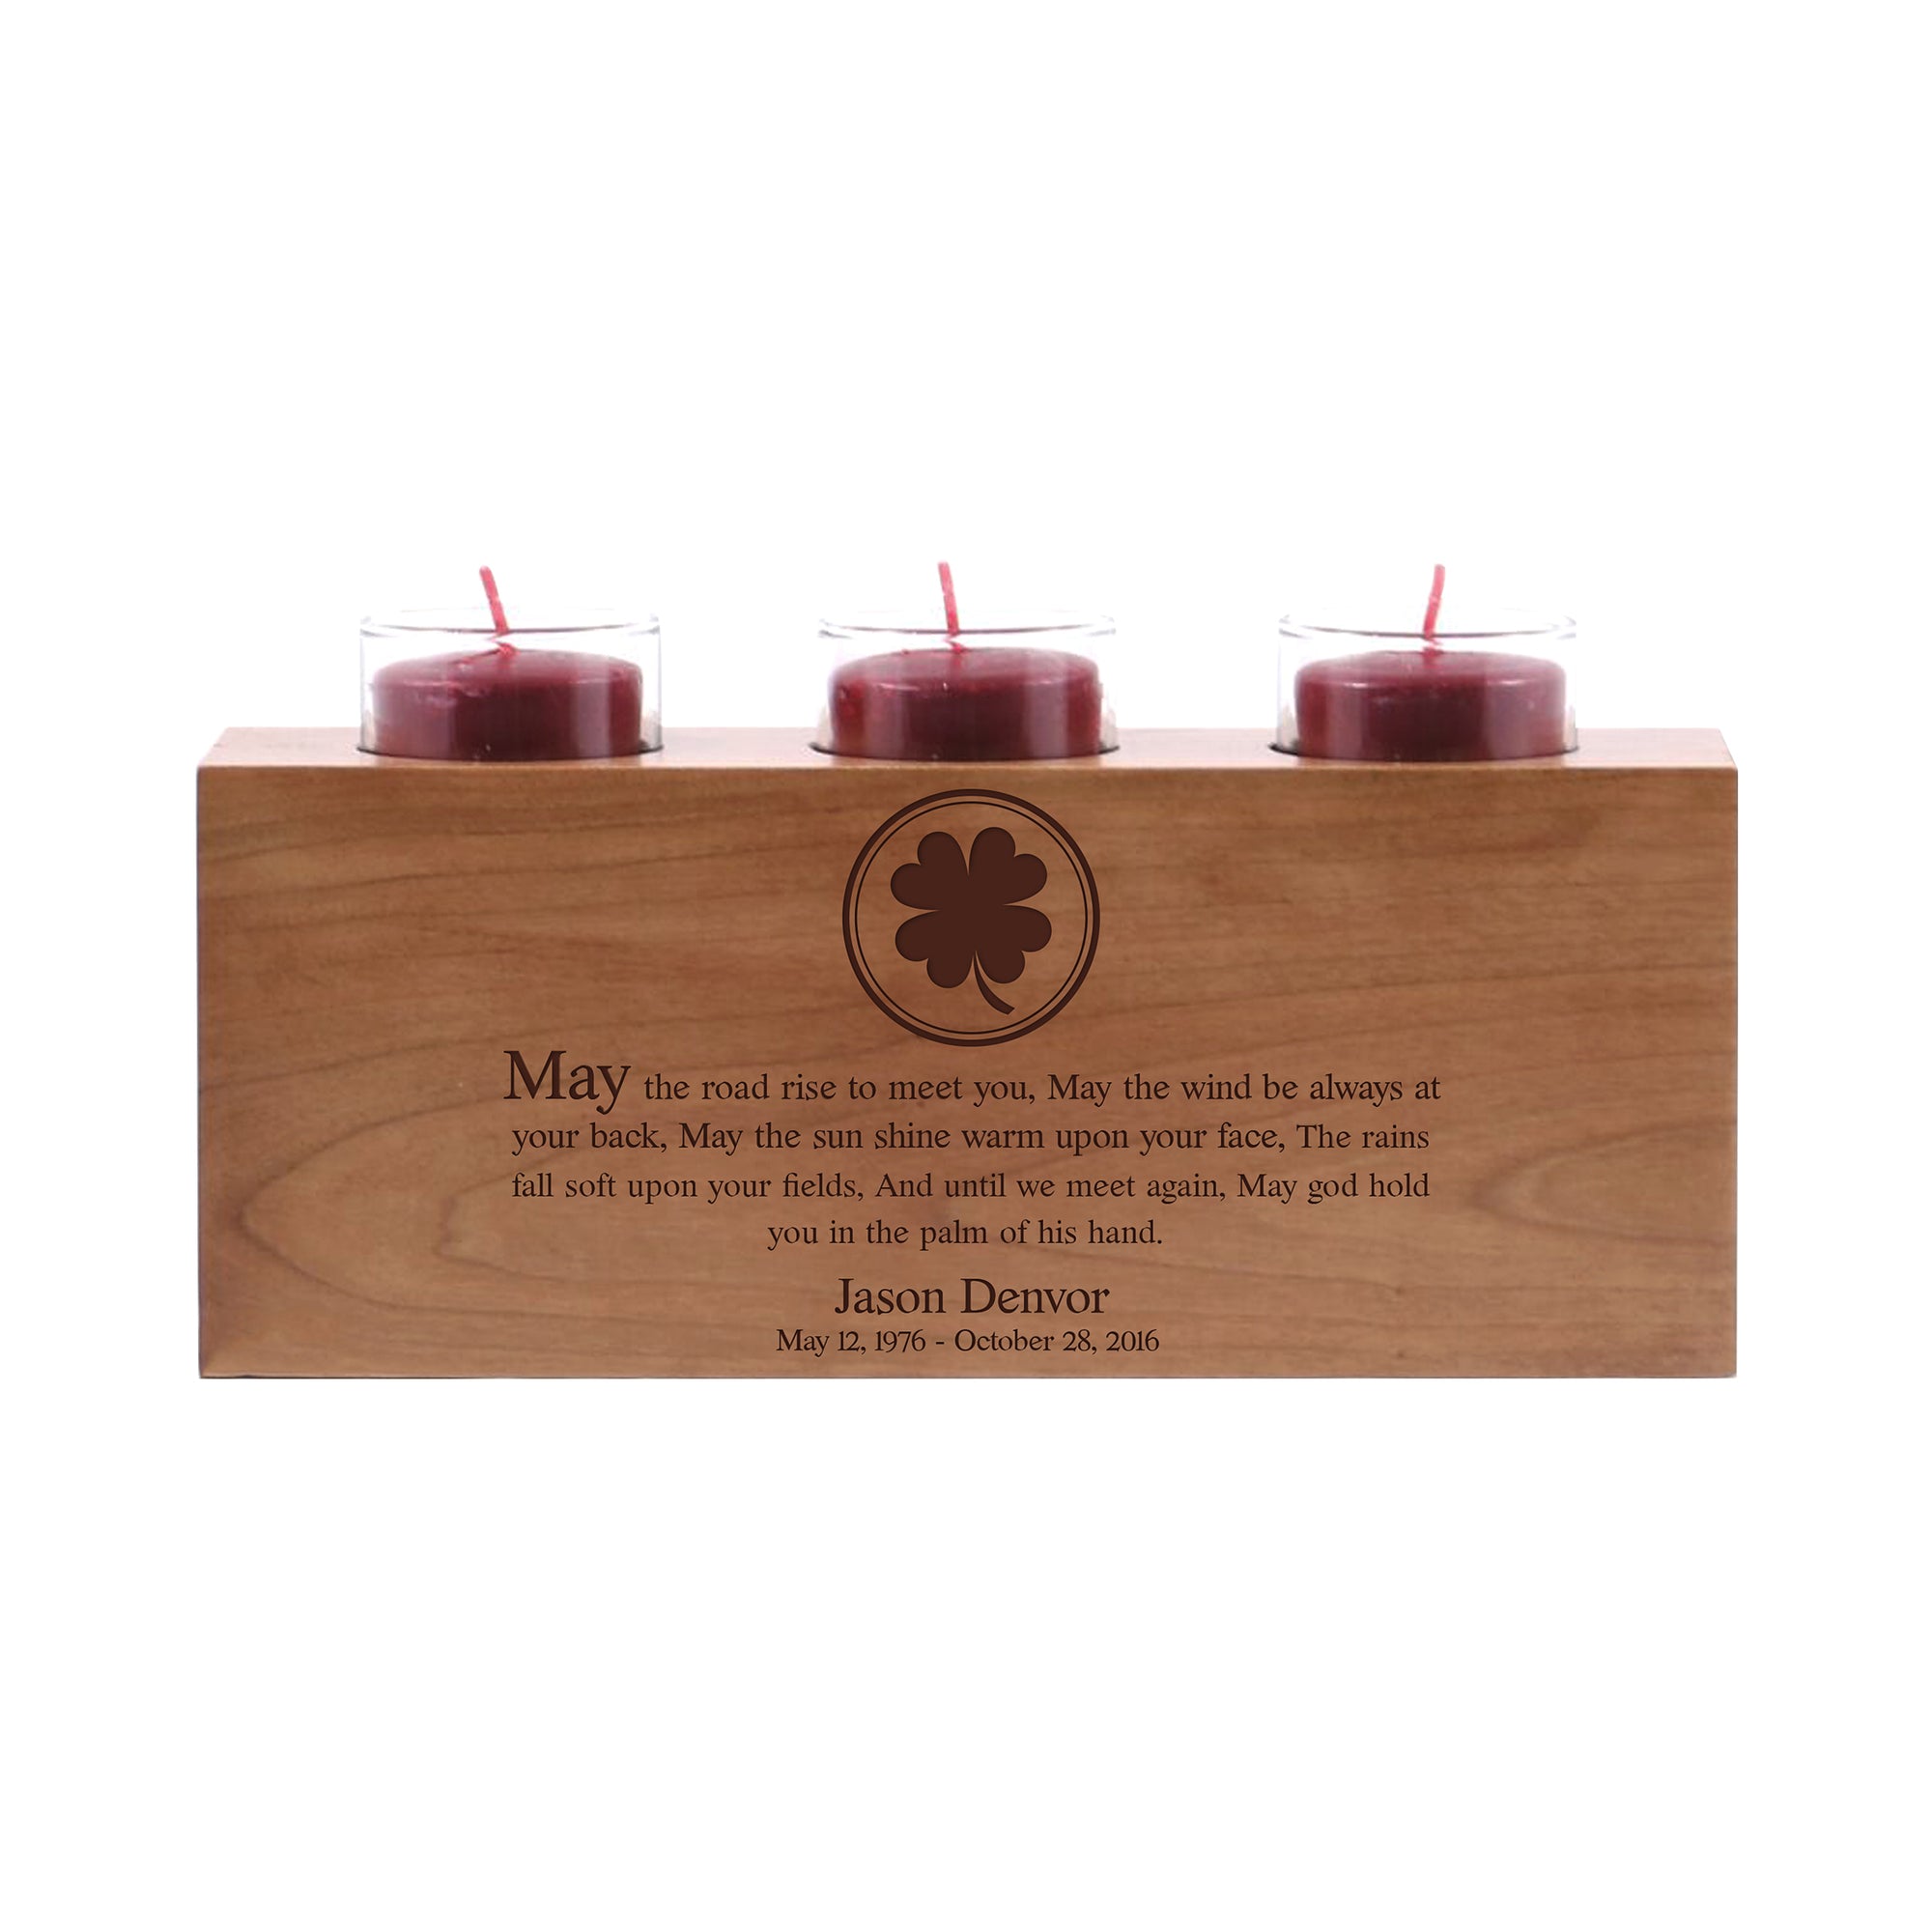 LifeSong Milestones Personalized Memorial 3 Votive Candle Holder May The Road Rise Bereavement Keepsake Candle Holder Loss of Loved One Sympathy Home Decor - 10” x 4” x 4”